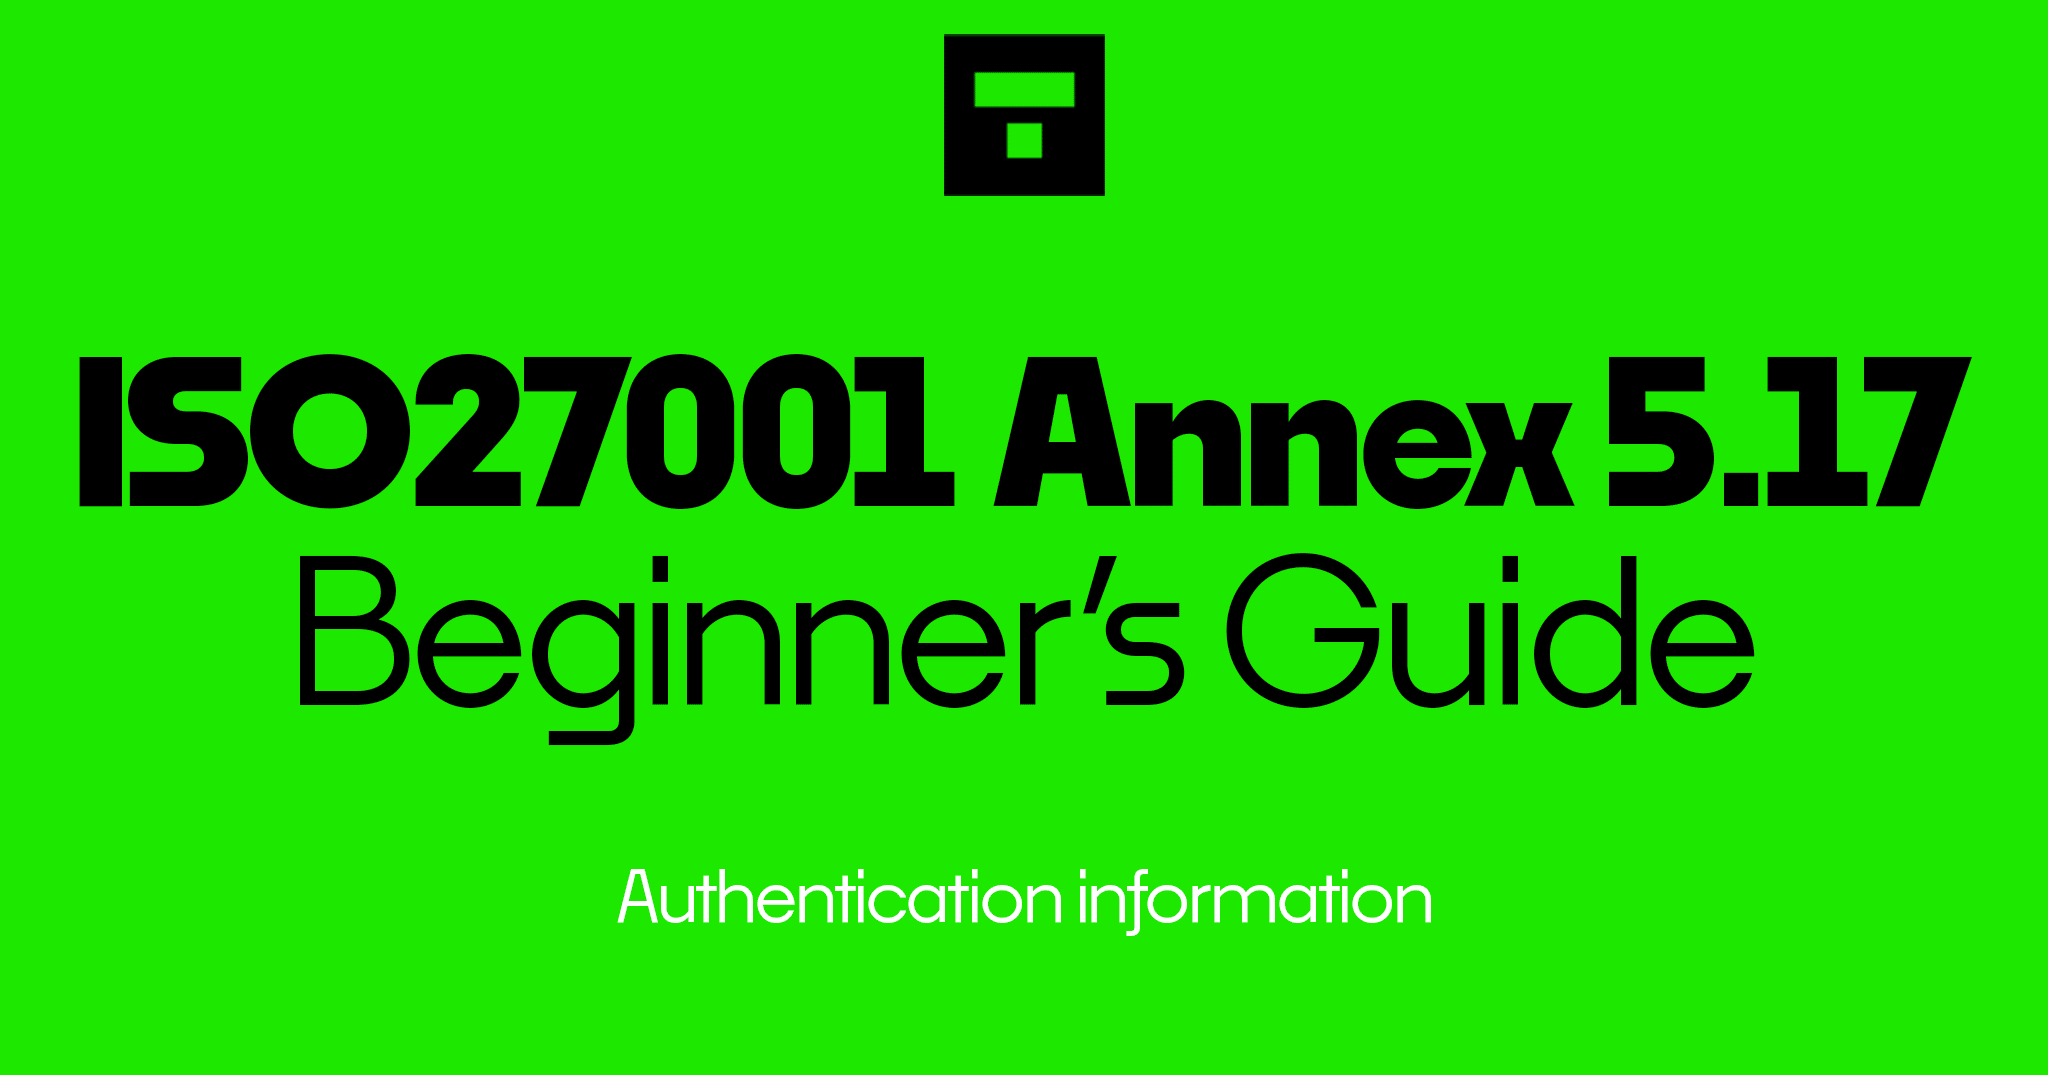 ISO 27001 Annex A 5.17 Authentication information Beginner's Guide